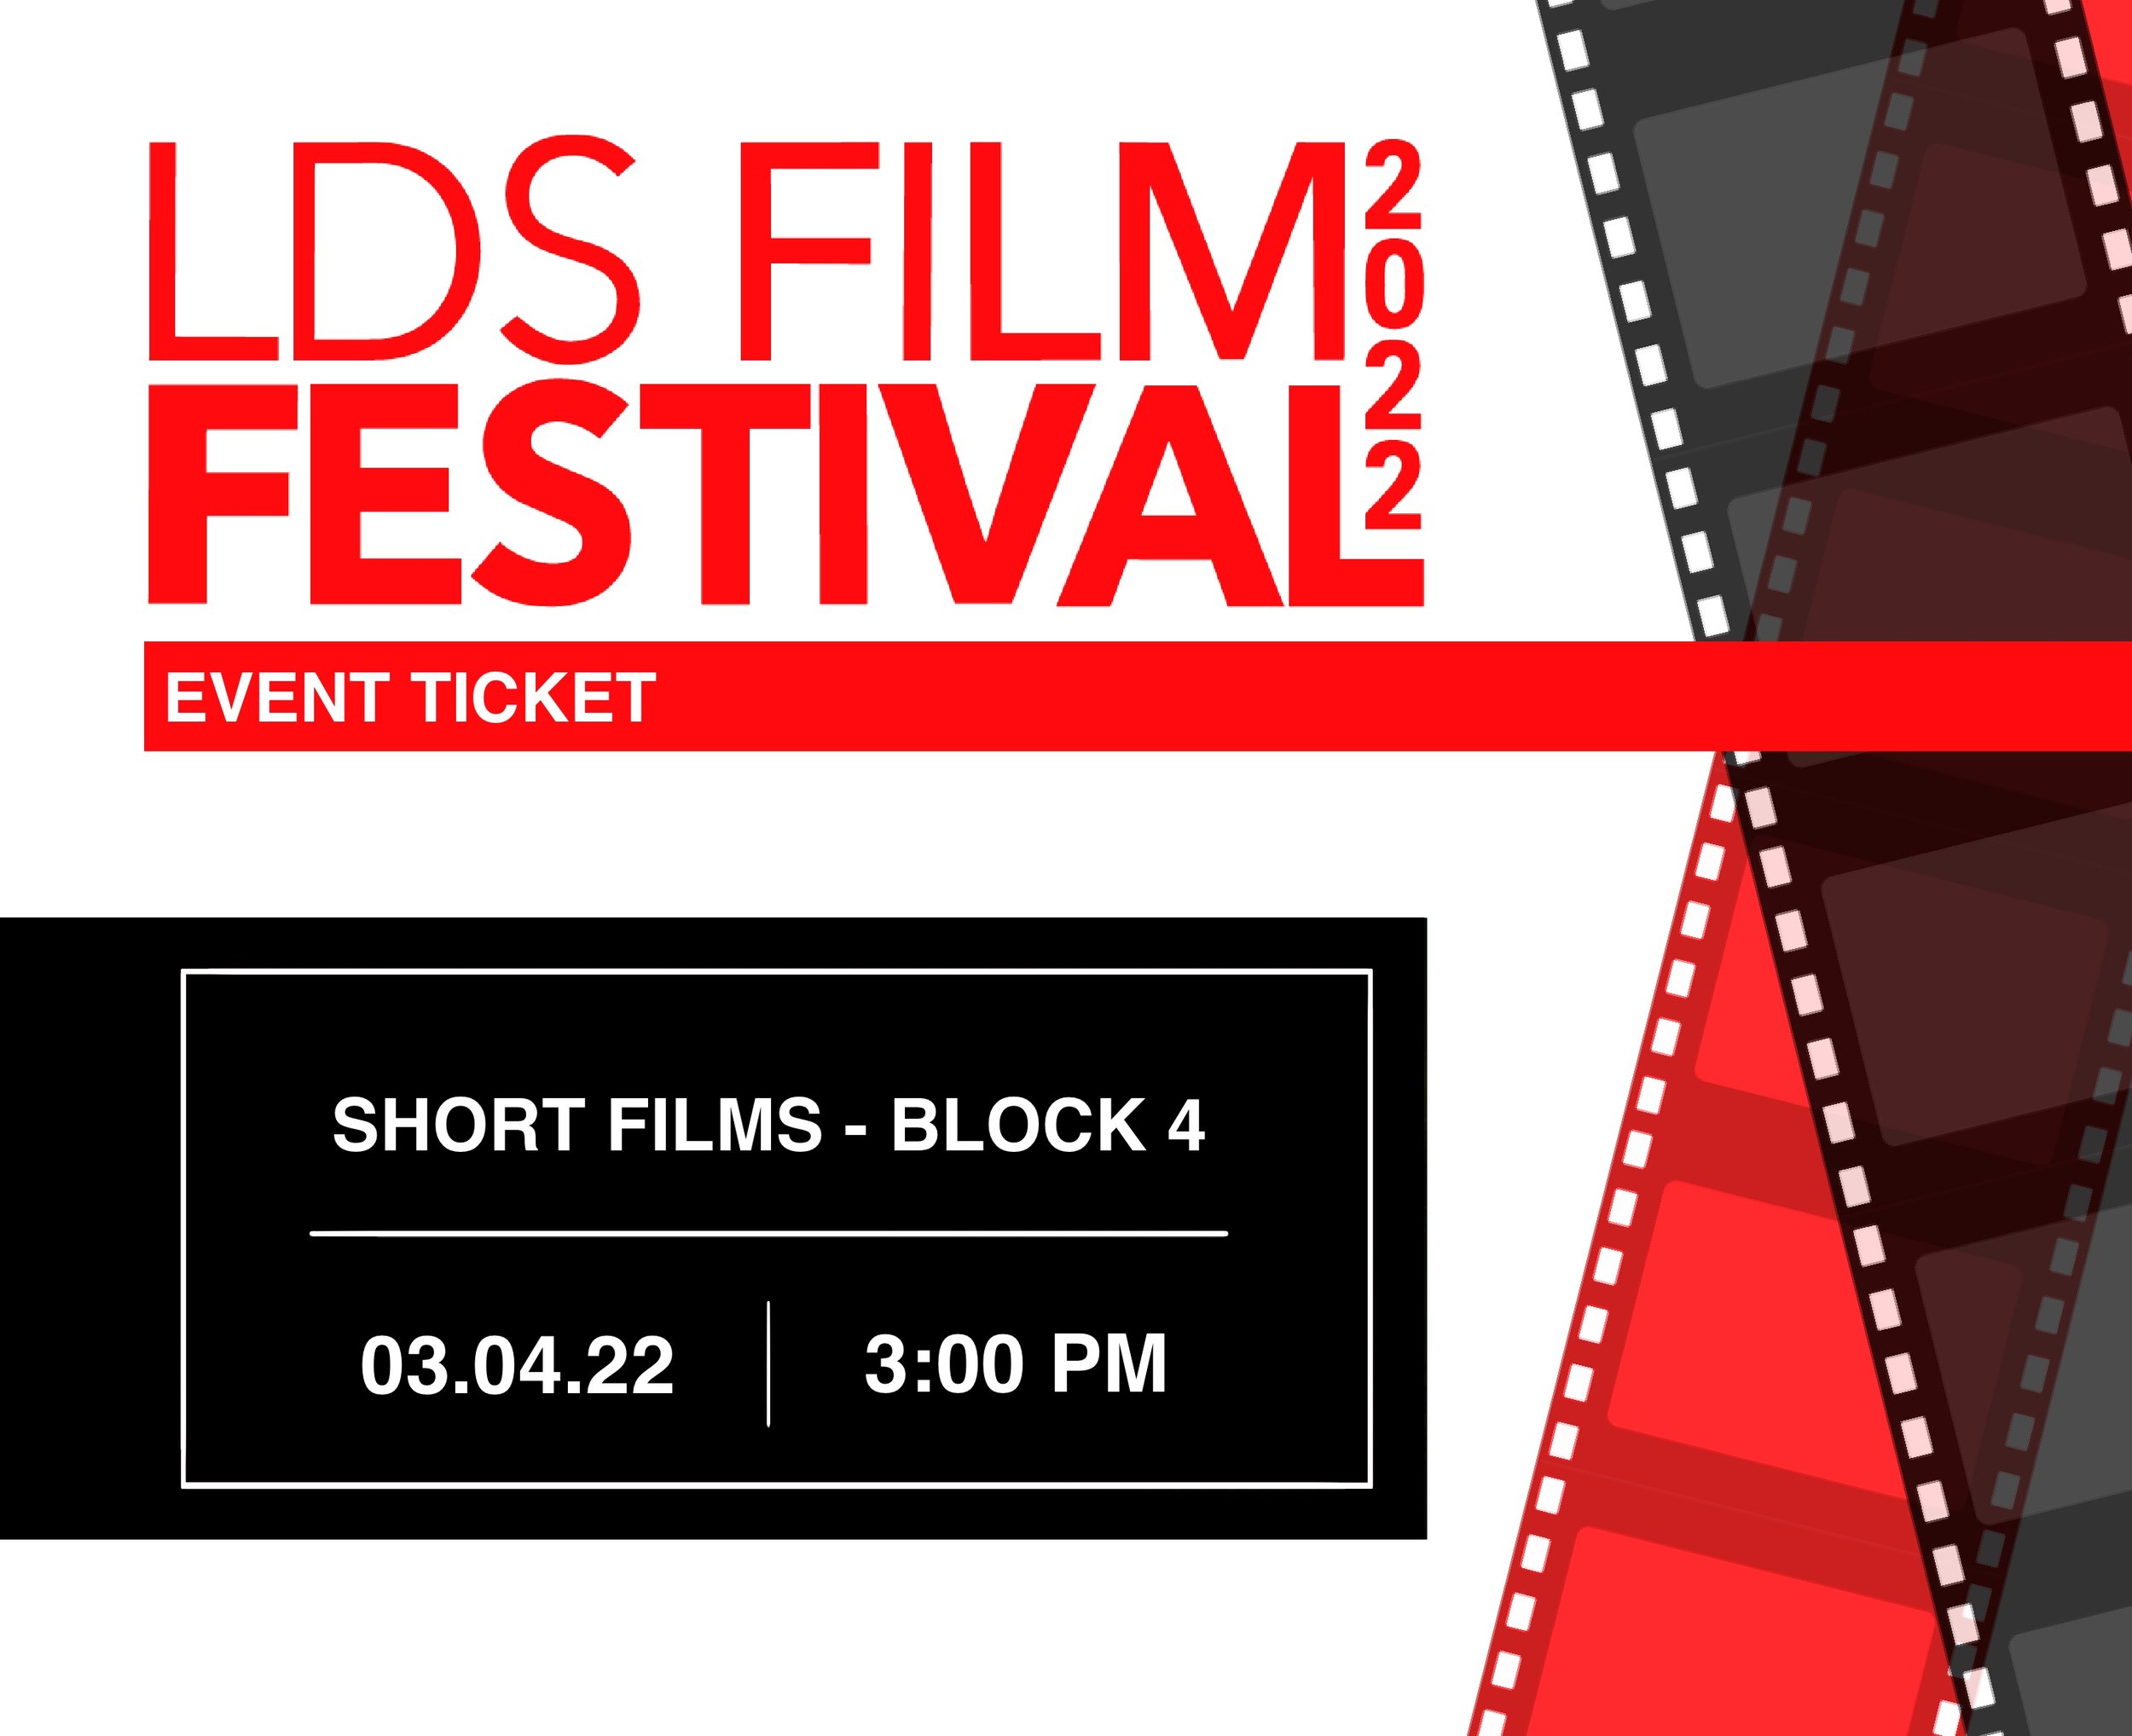 SHORT FILMS - Block 403.04.22 |3:00 PMShowhouse II Theatre - Block 4 Screenings Include:Broken BreadFirst DayLa Plata Del RealLucy and the BearSuspectVoicesQ&A’s with filmmakers